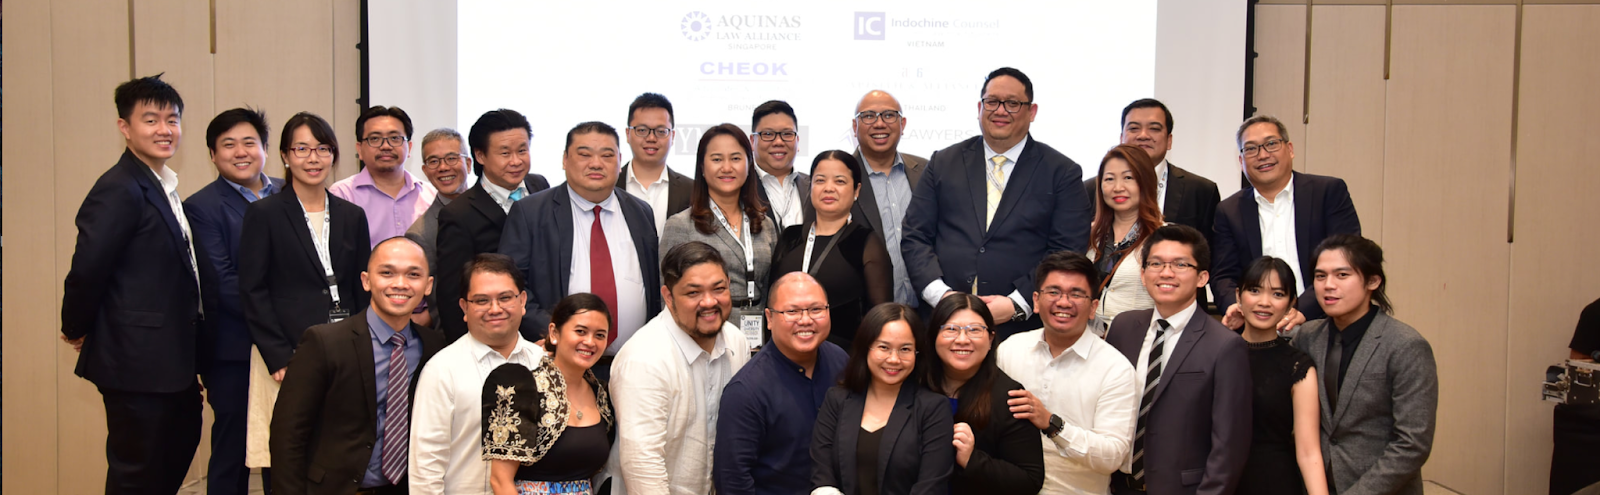 ASEAN Legal Alliance Conference 2019